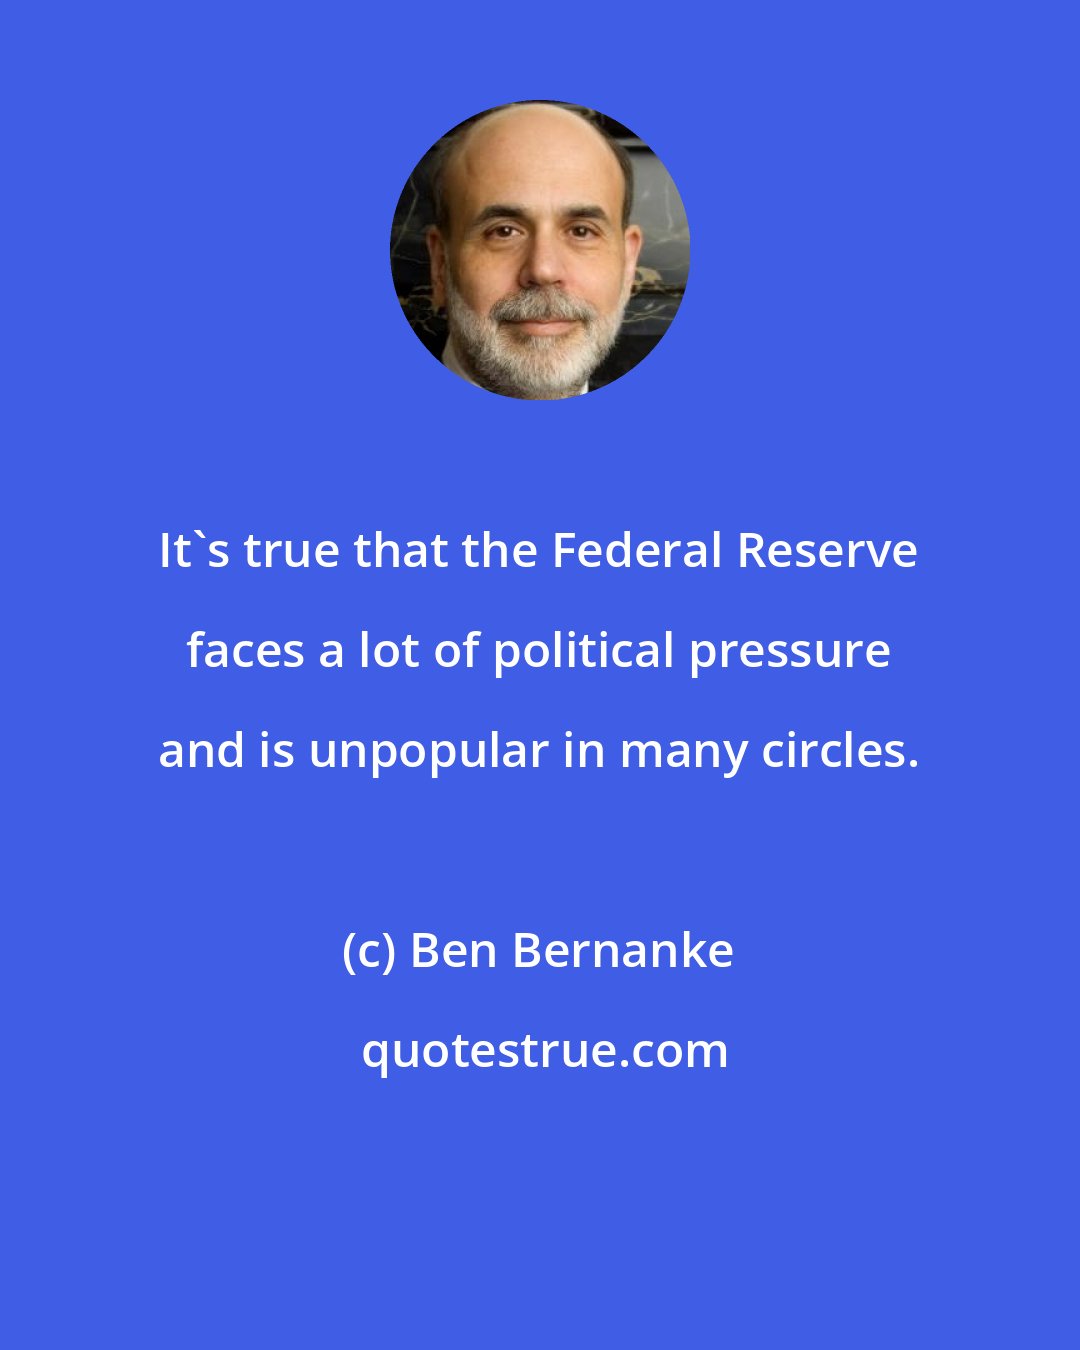 Ben Bernanke: It's true that the Federal Reserve faces a lot of political pressure and is unpopular in many circles.